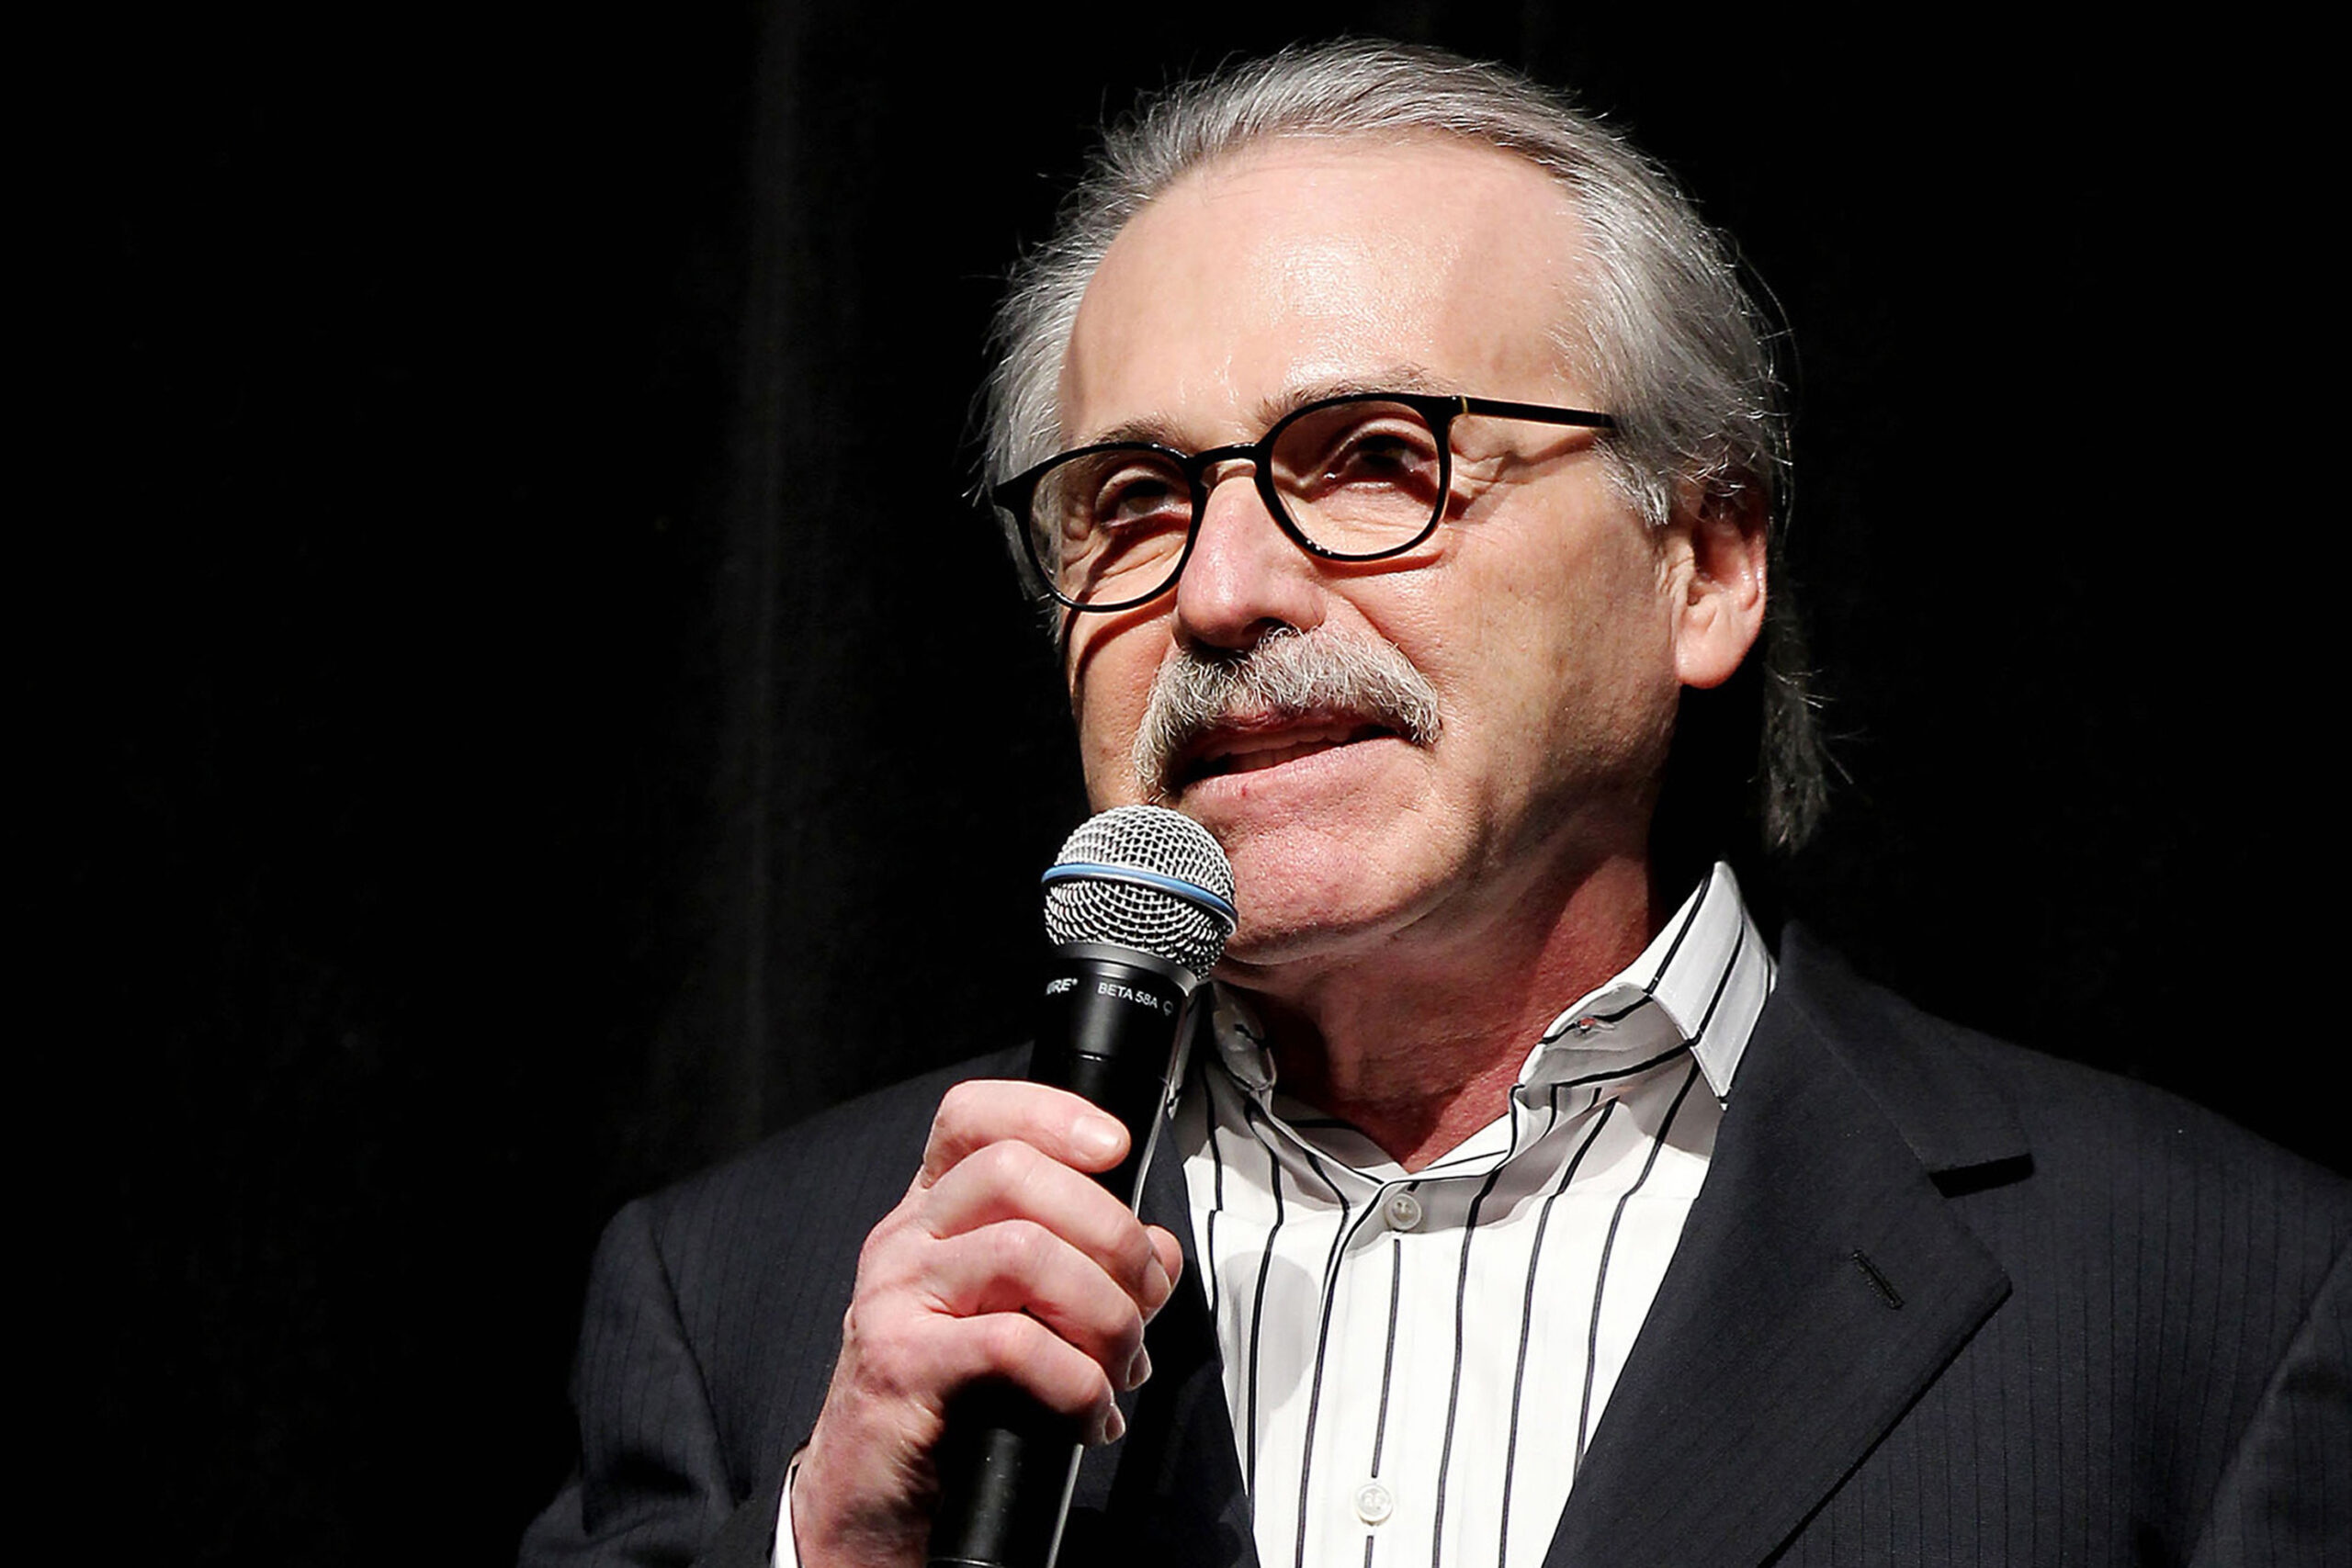 David Pecker Testifies He Spoke With Sarah Sanders and Hope Hicks About Extending Hush Money Payments After Trump Was Elected